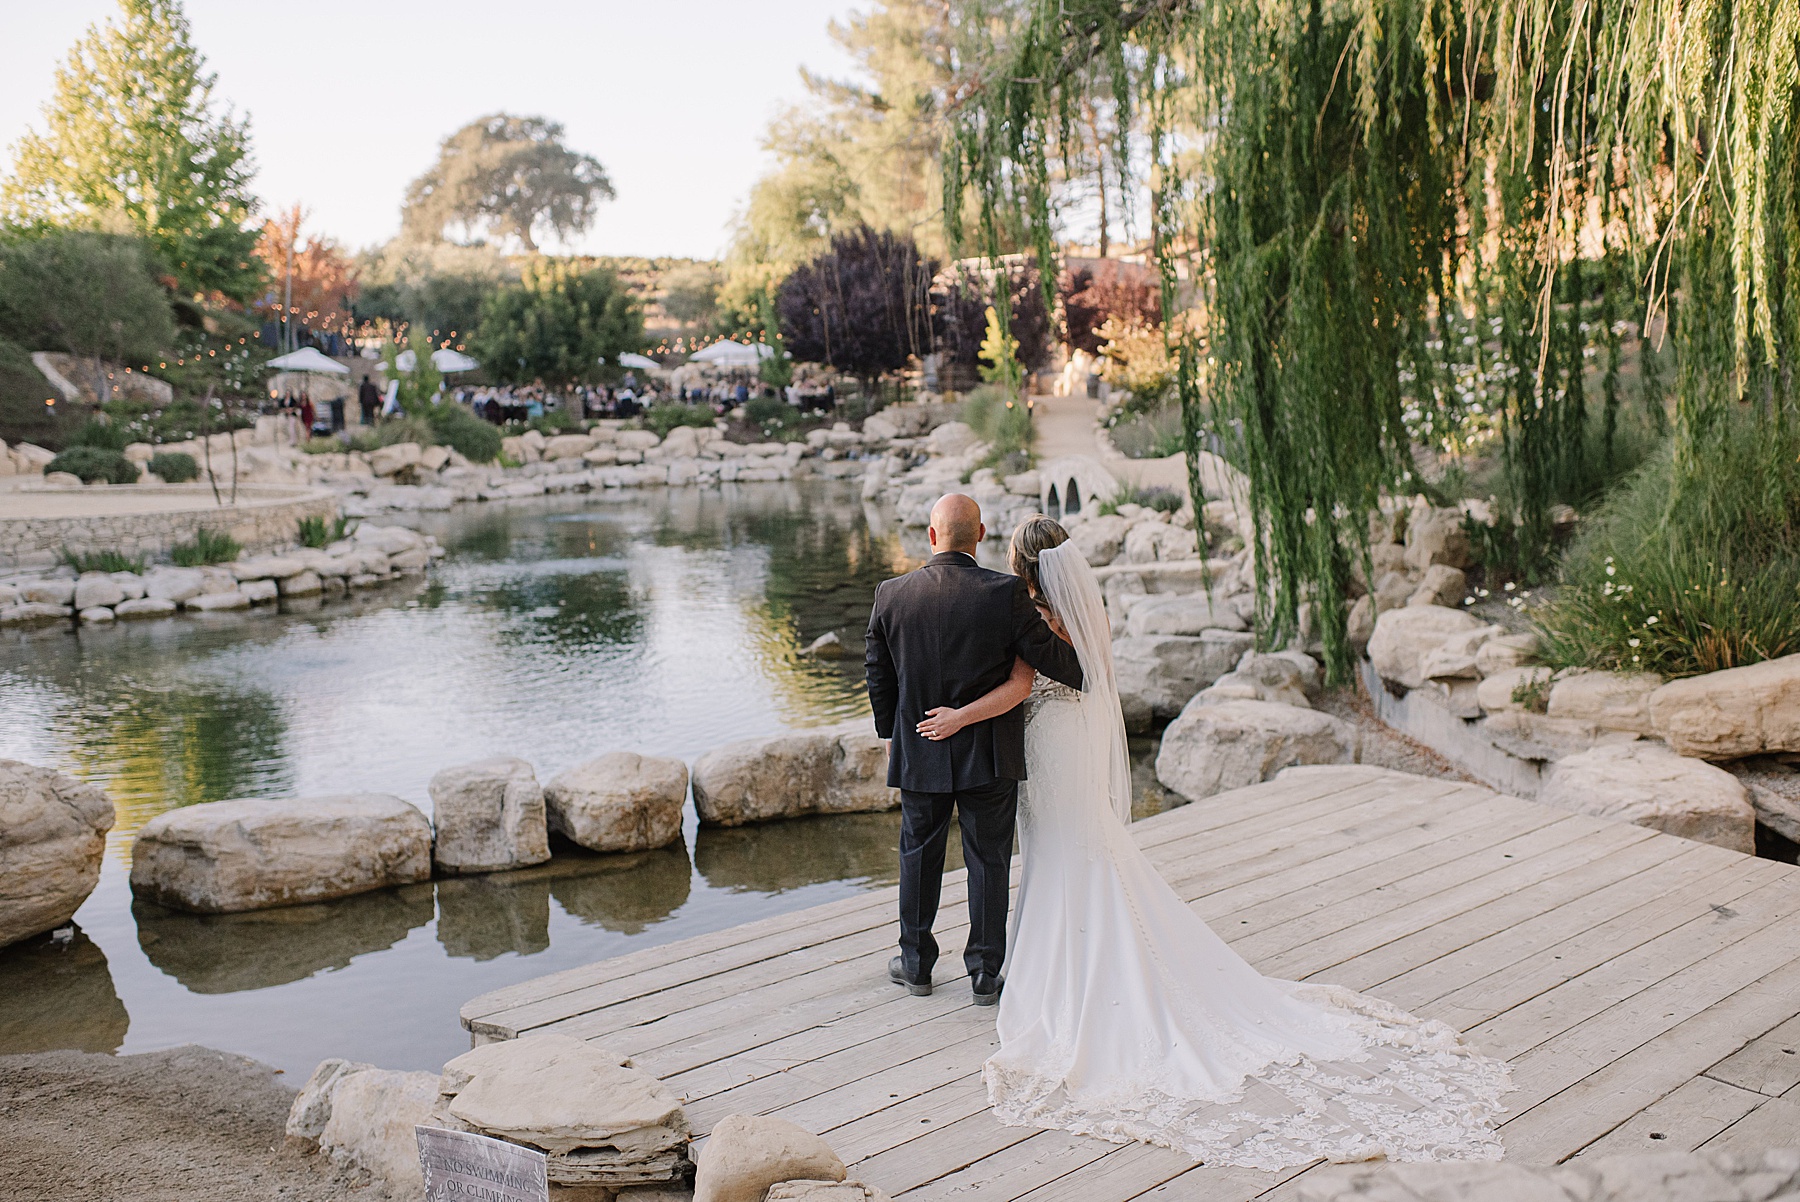 How to have a stress-free wedding day. Couple taking it all in and being present on thier wedding day. Terra Mia Paso Robles, California